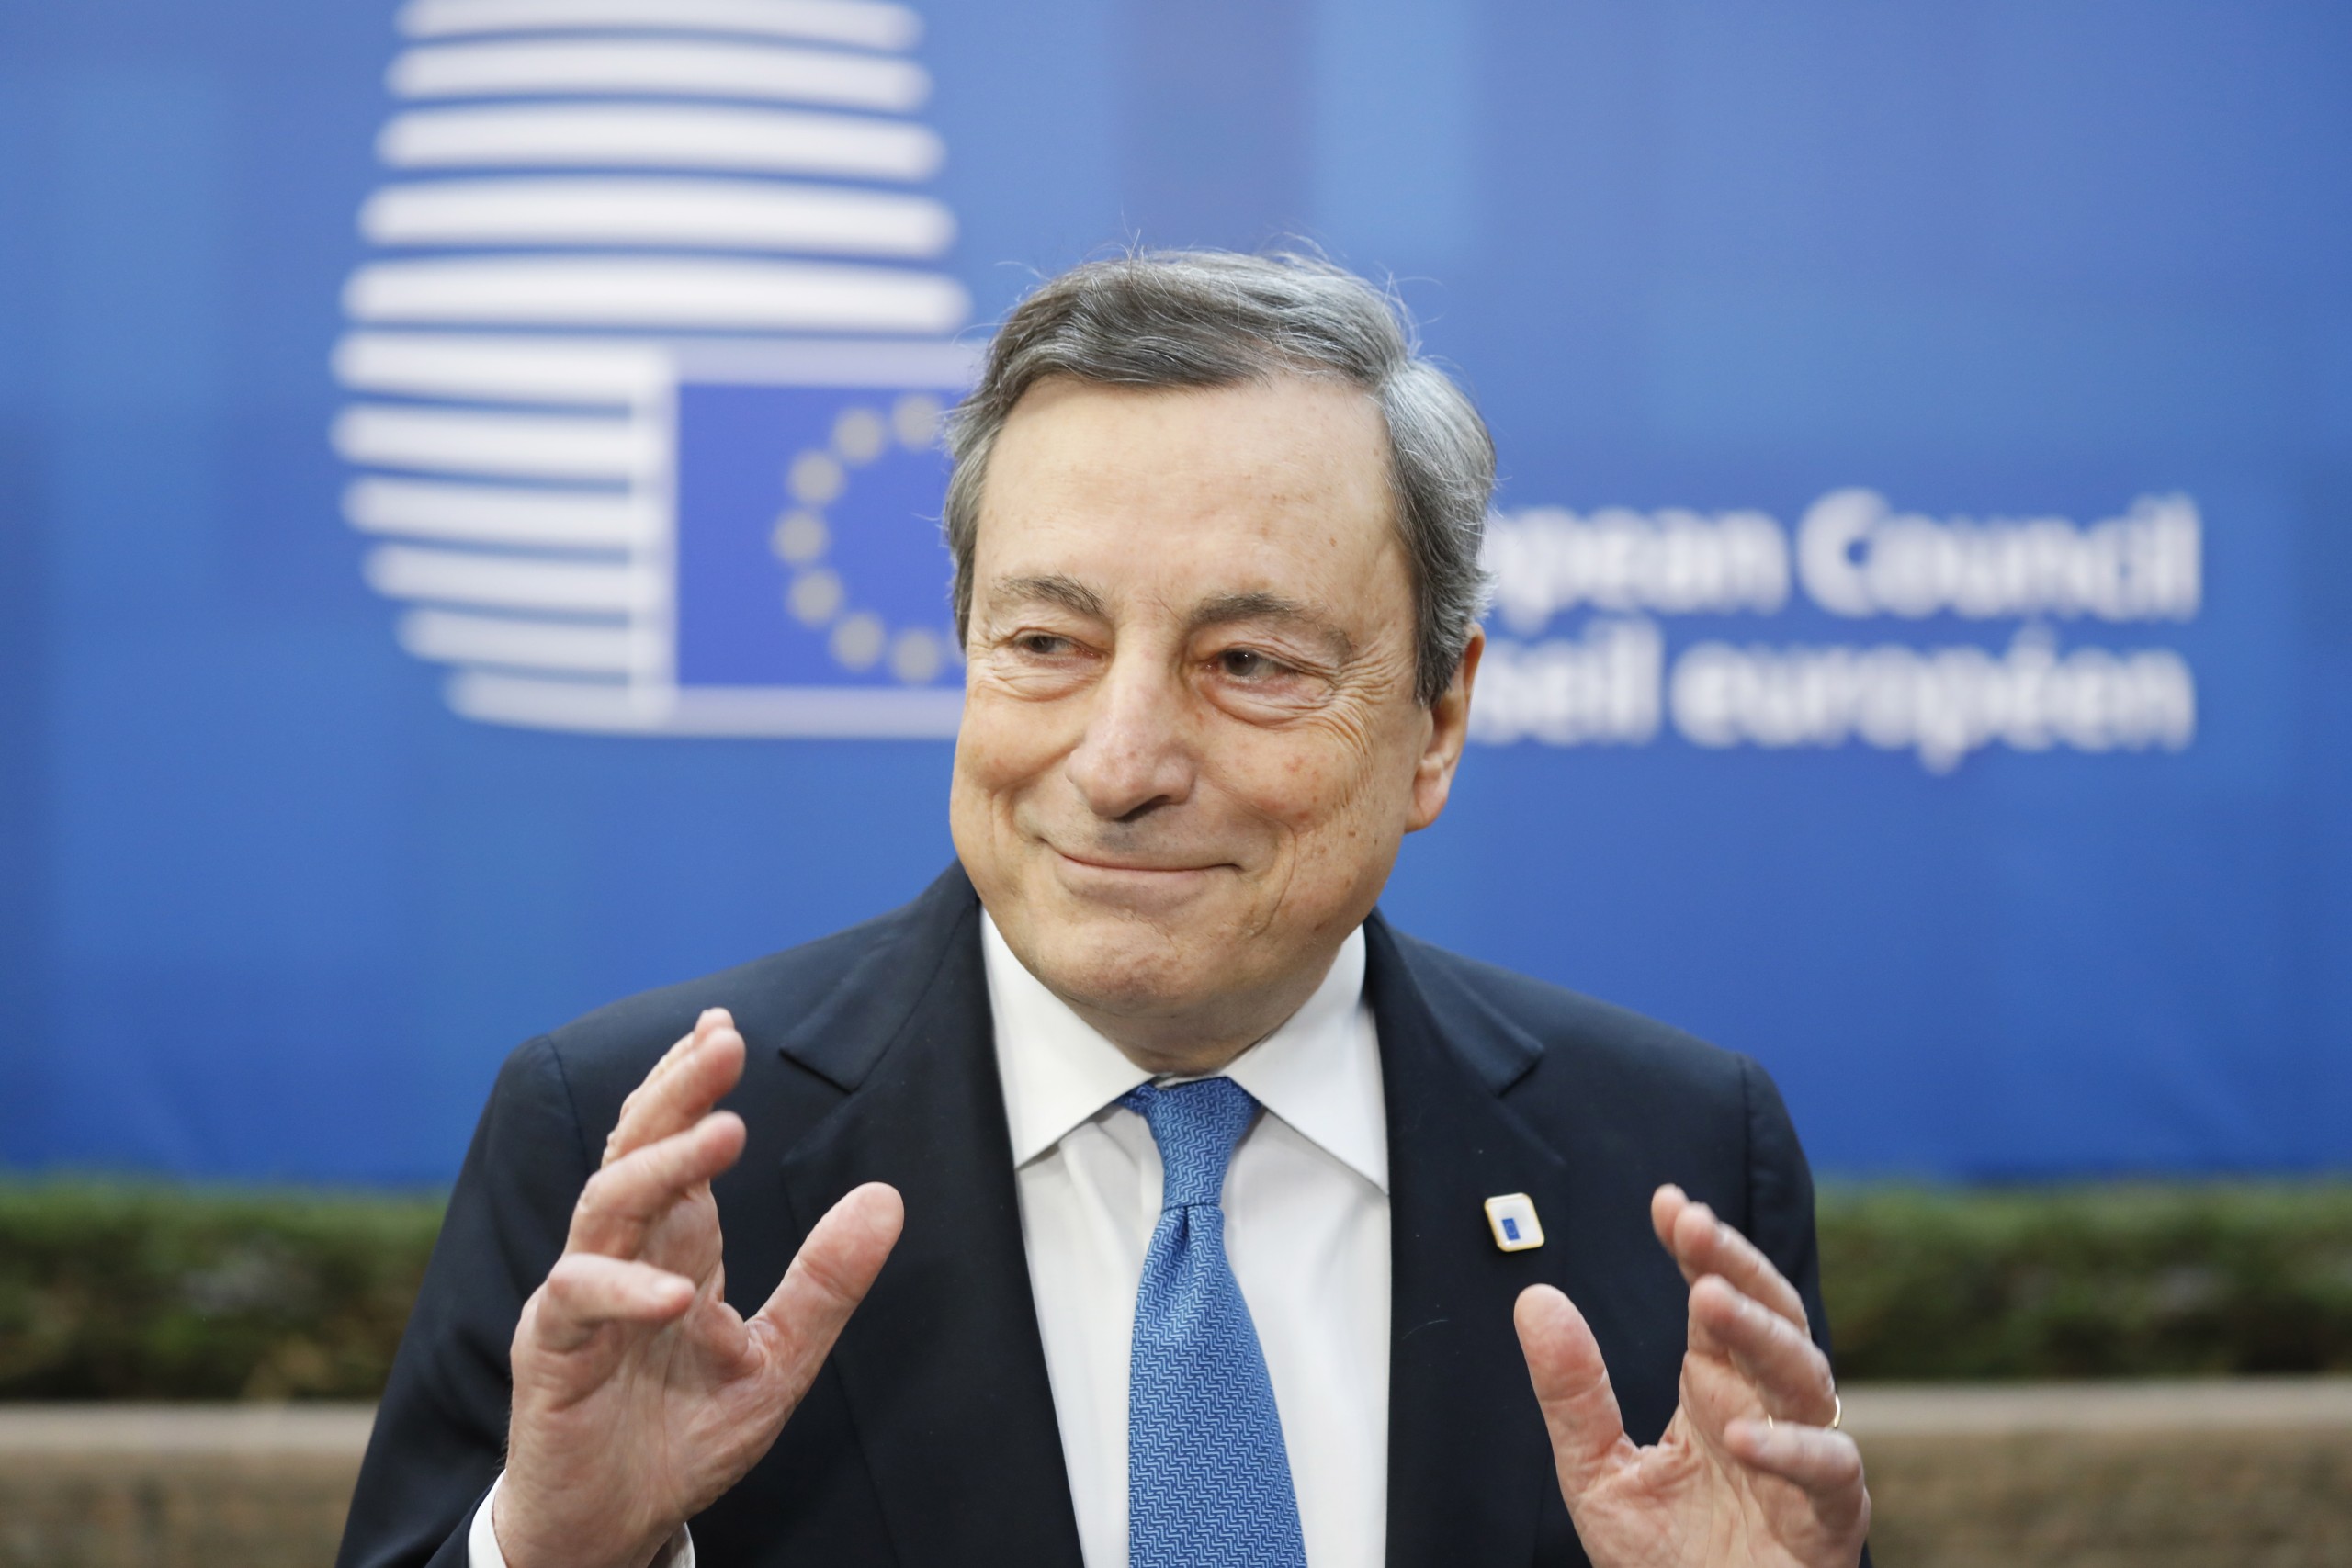 epa09846772 Italian Prime Minister Mario Draghi arrives for the European Council Summit in Brussels, Belgium, 24 March 2022. The European Council summit starts with the participation of US President Joe Biden to address Russia's ongoing military aggression against Ukraine. After that, Head of States will continue discussions on how best to support Ukraine in these dramatic circumstances.  EPA/JULIEN WARNAND